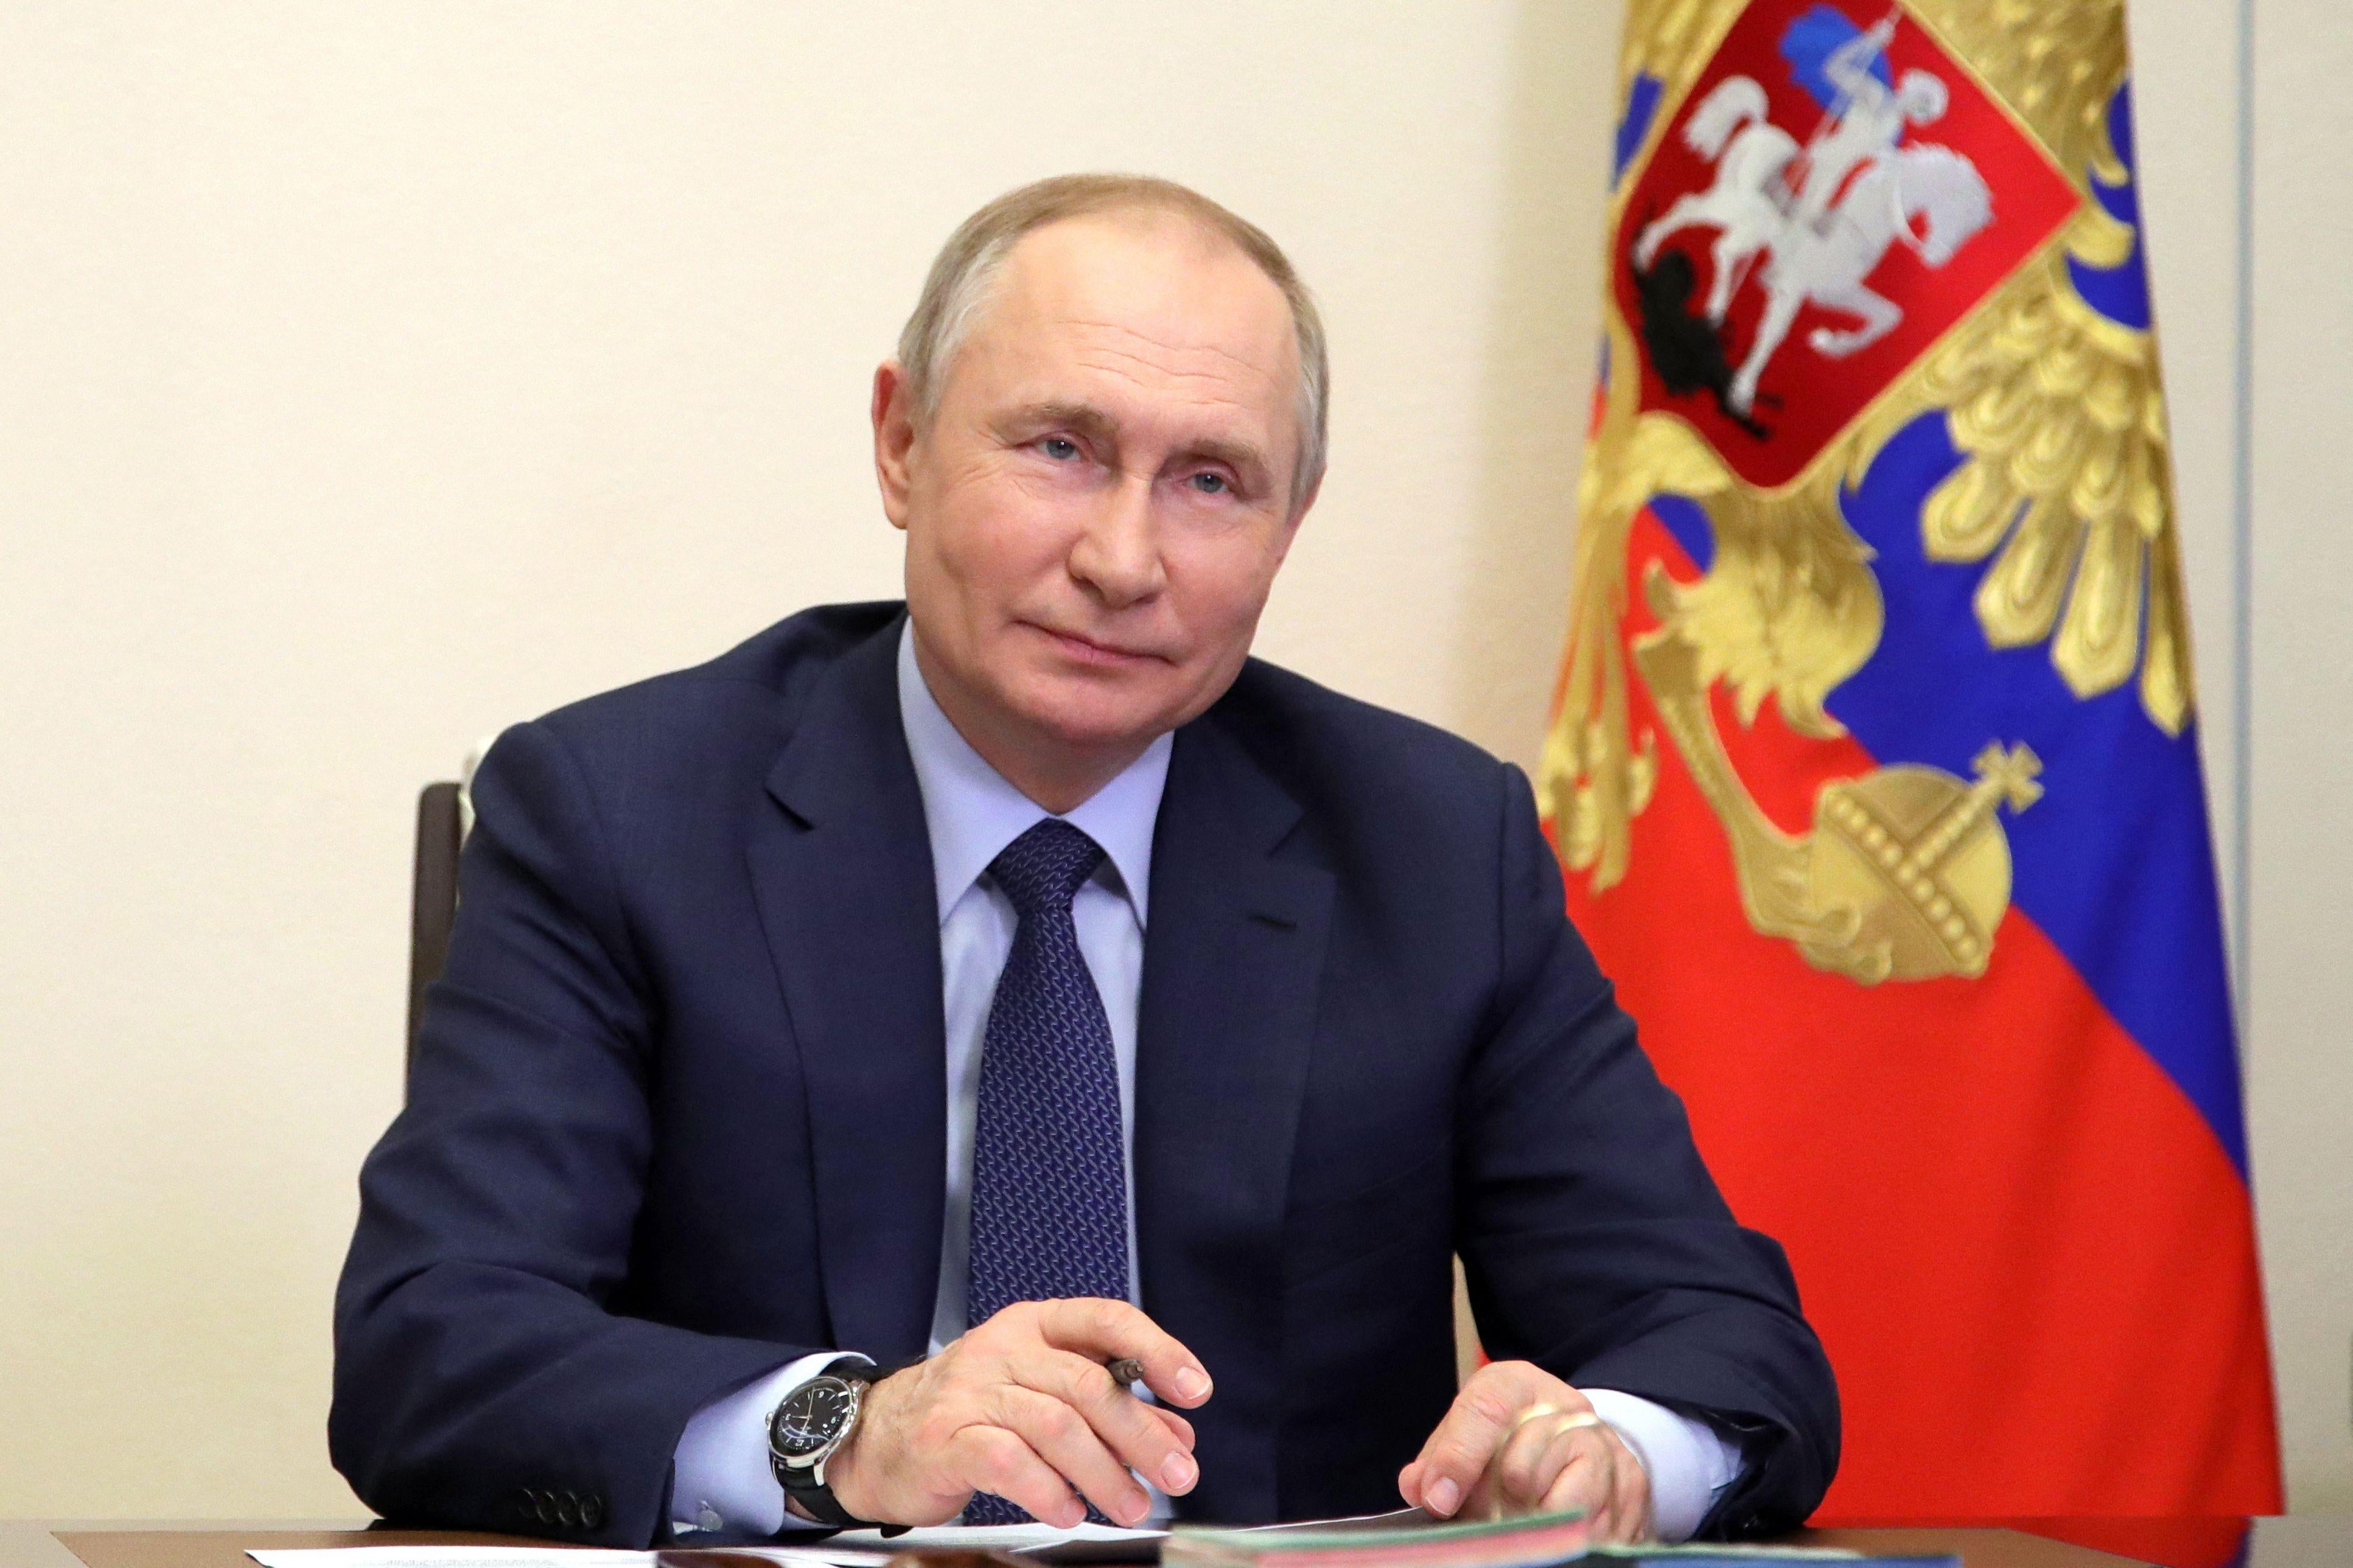 Putin grins next sitting next to the Russian Federation's flag.